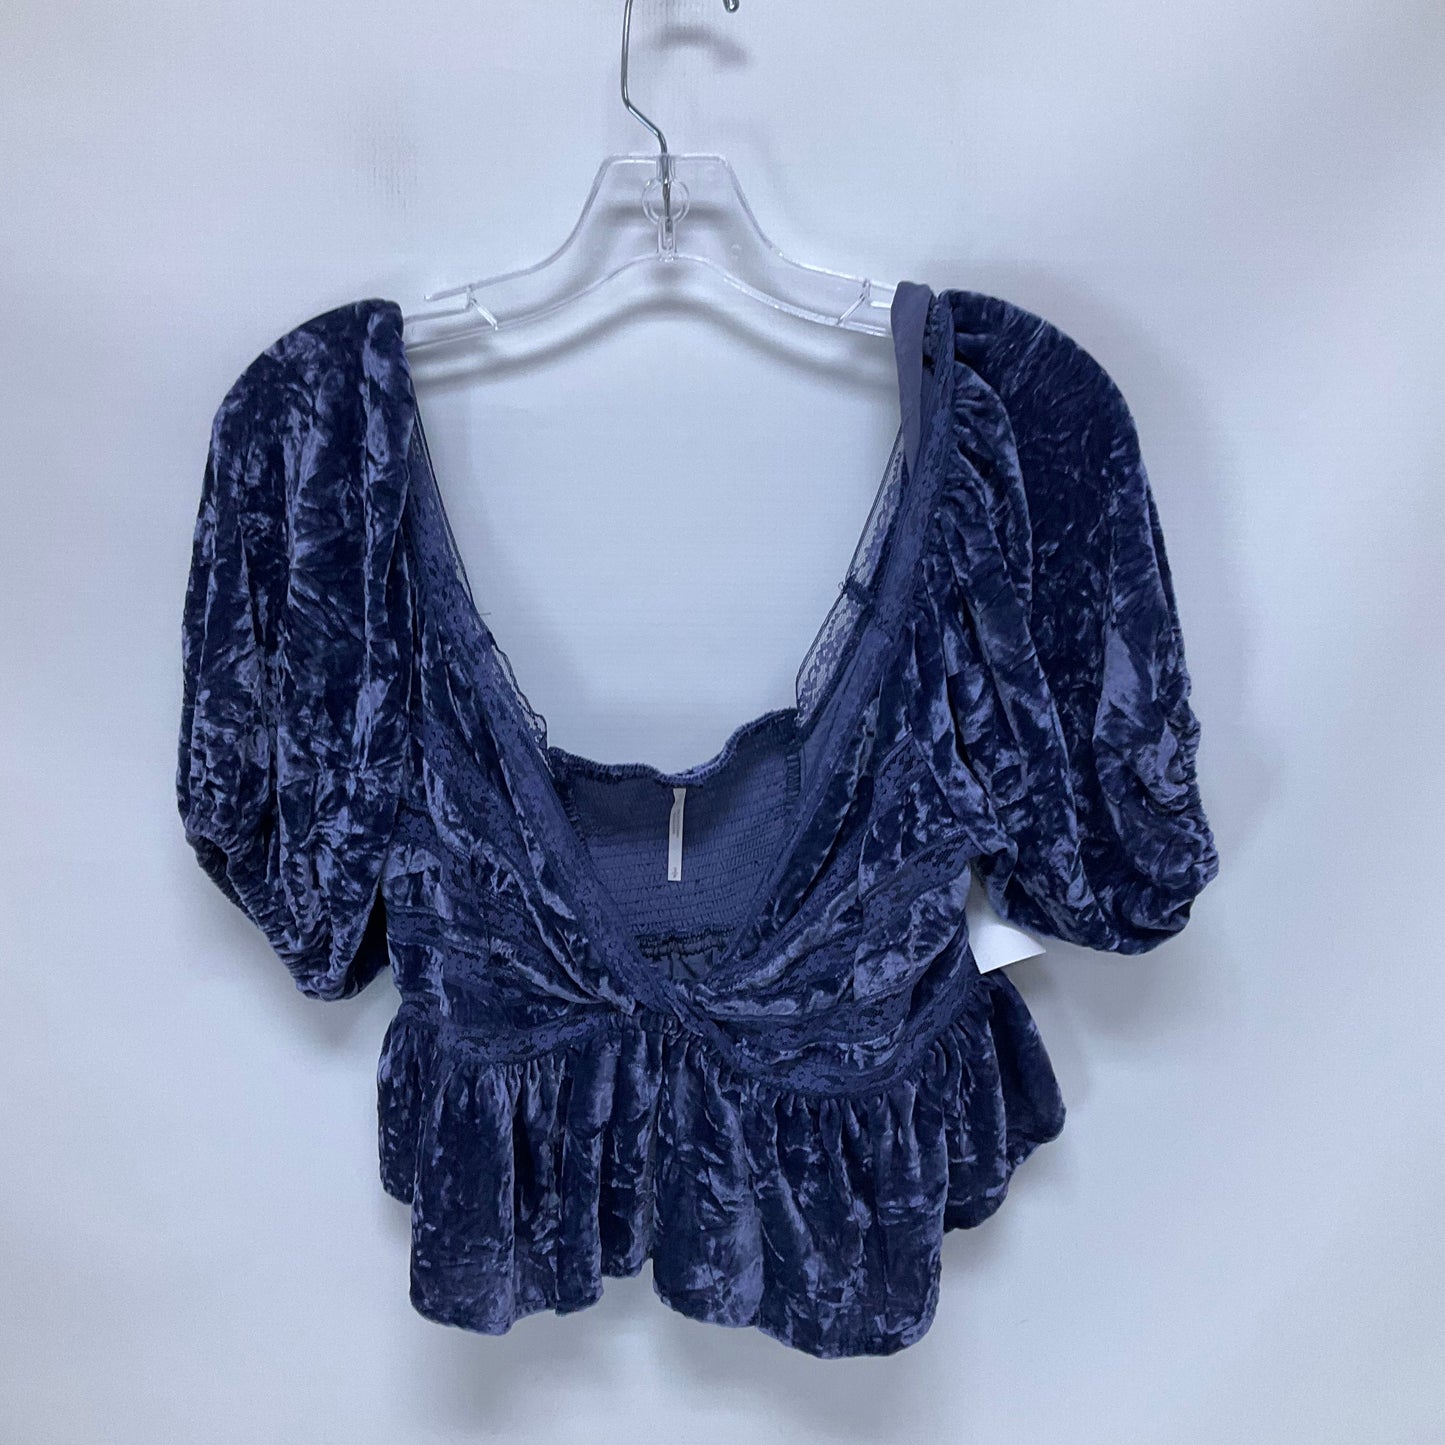 Blue Top Short Sleeve Free People, Size S